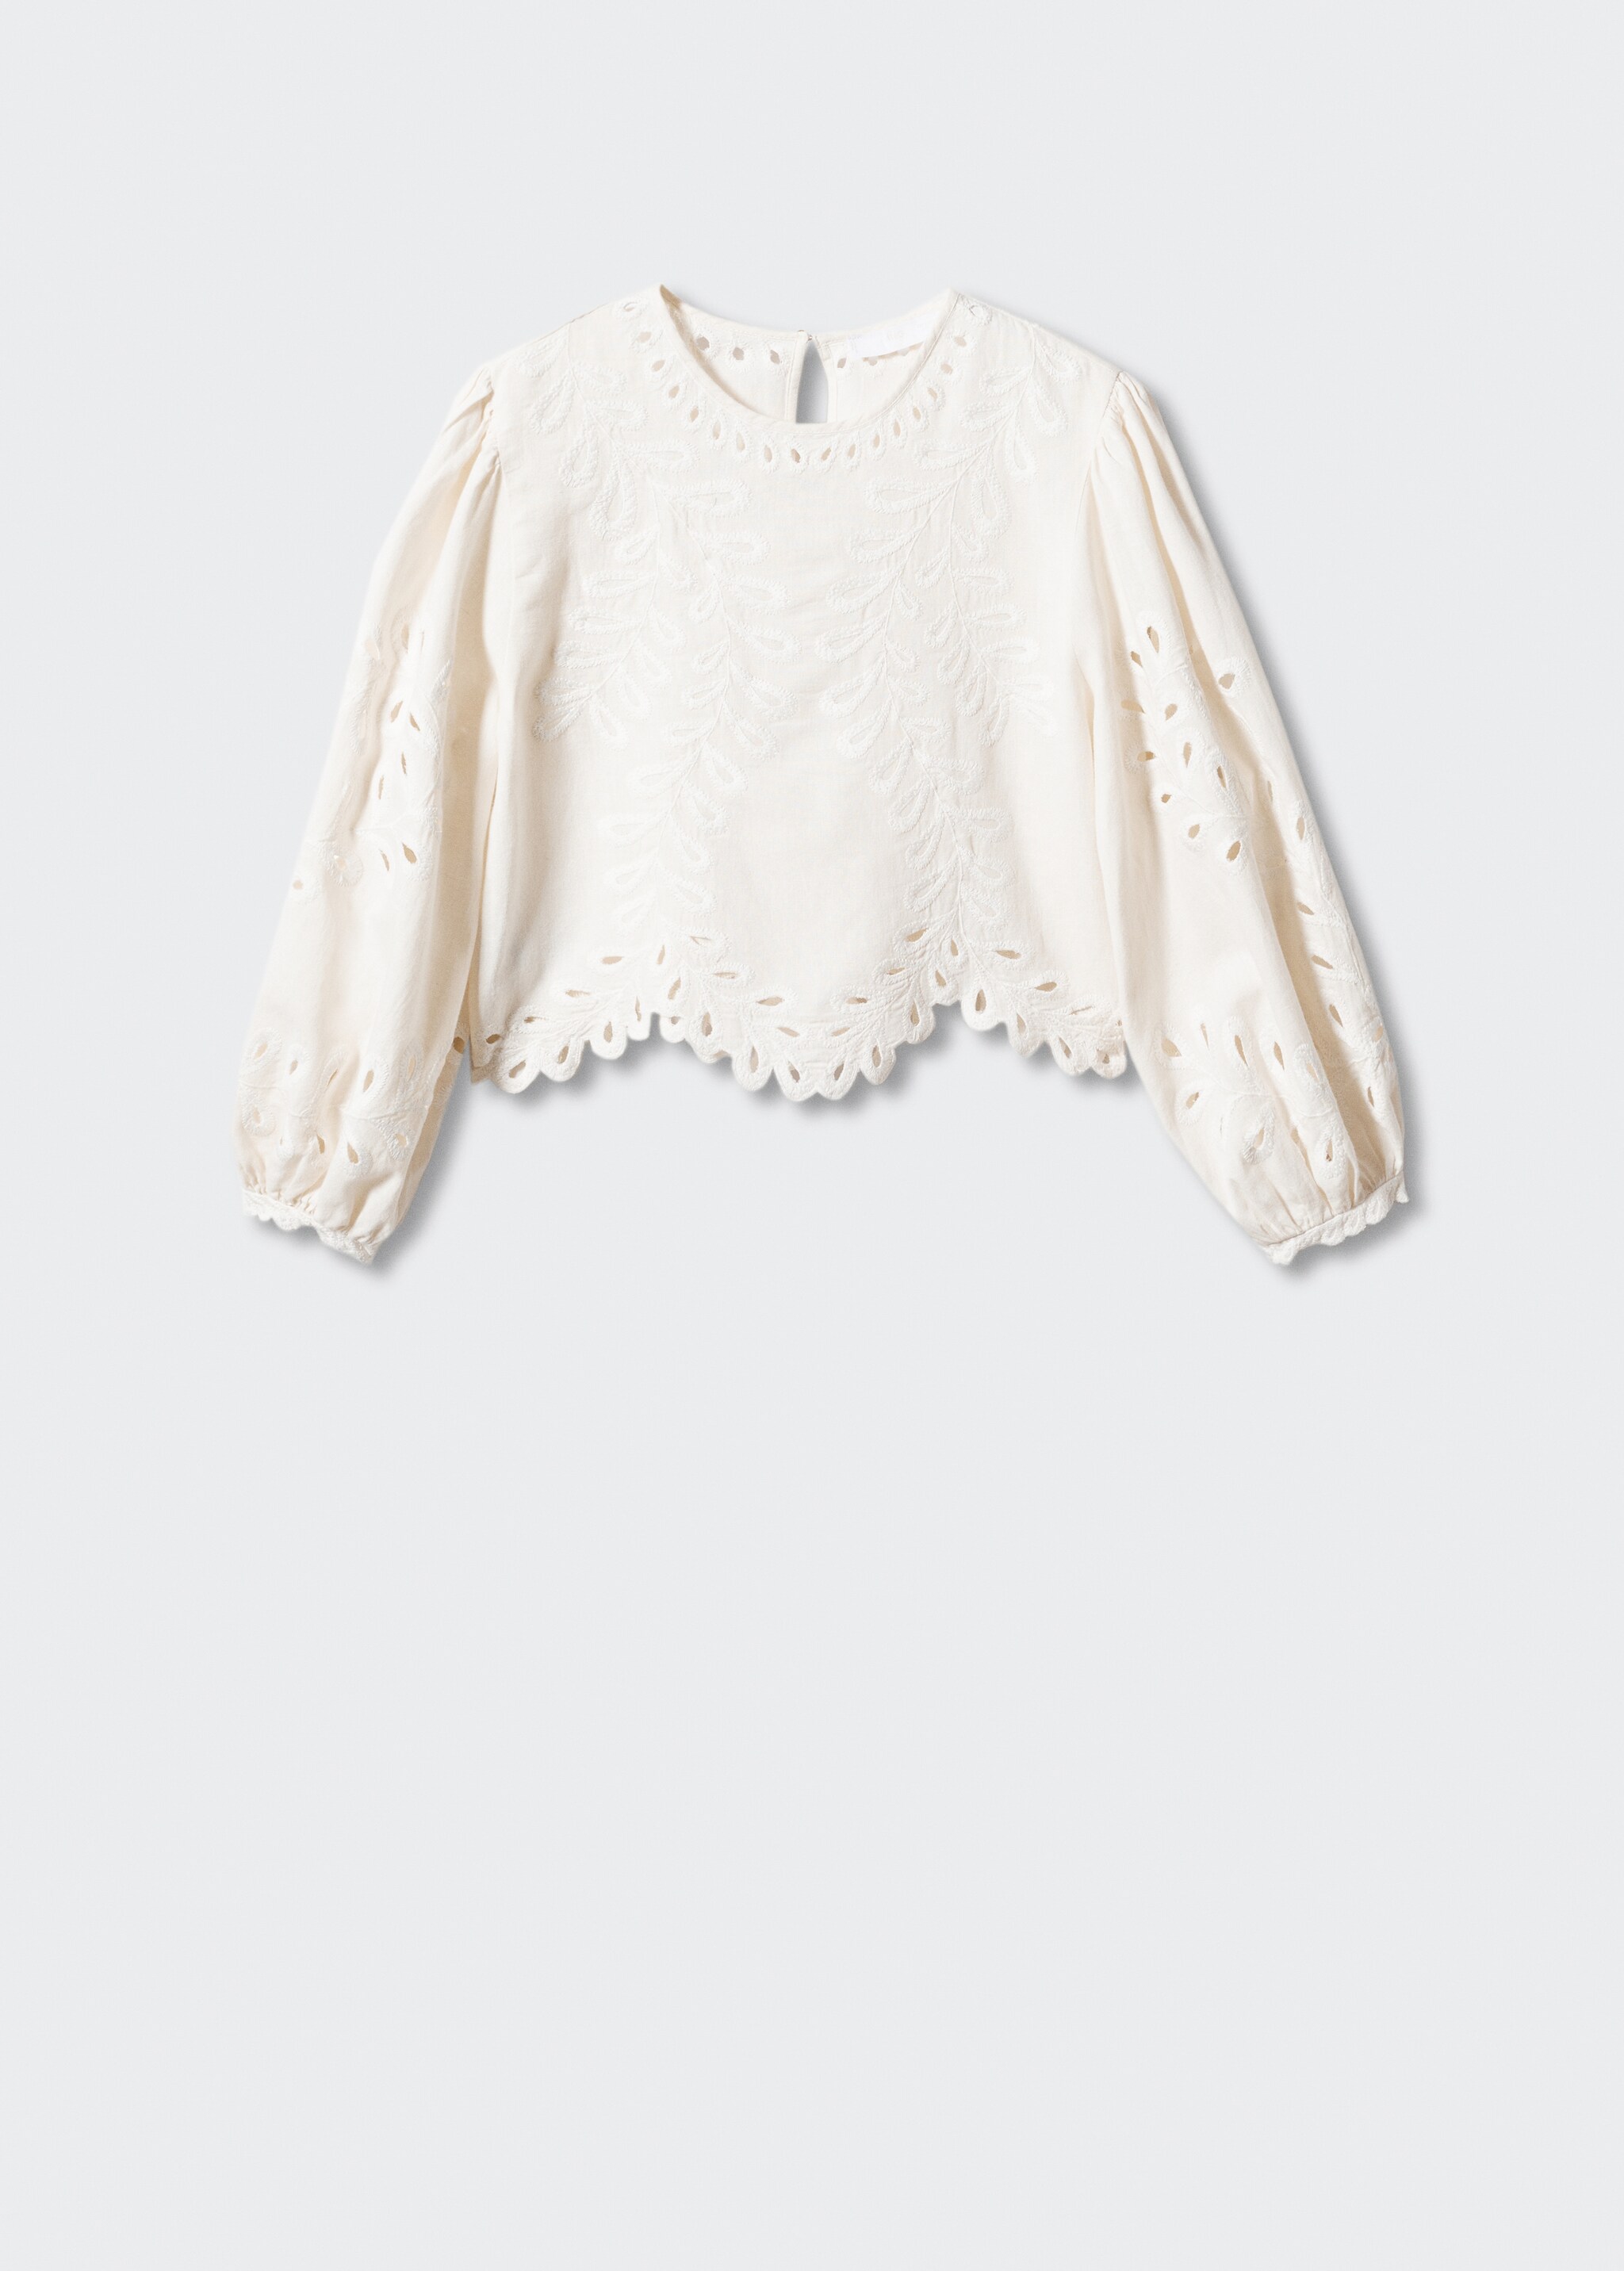 Openwork embroidered blouse - Article without model